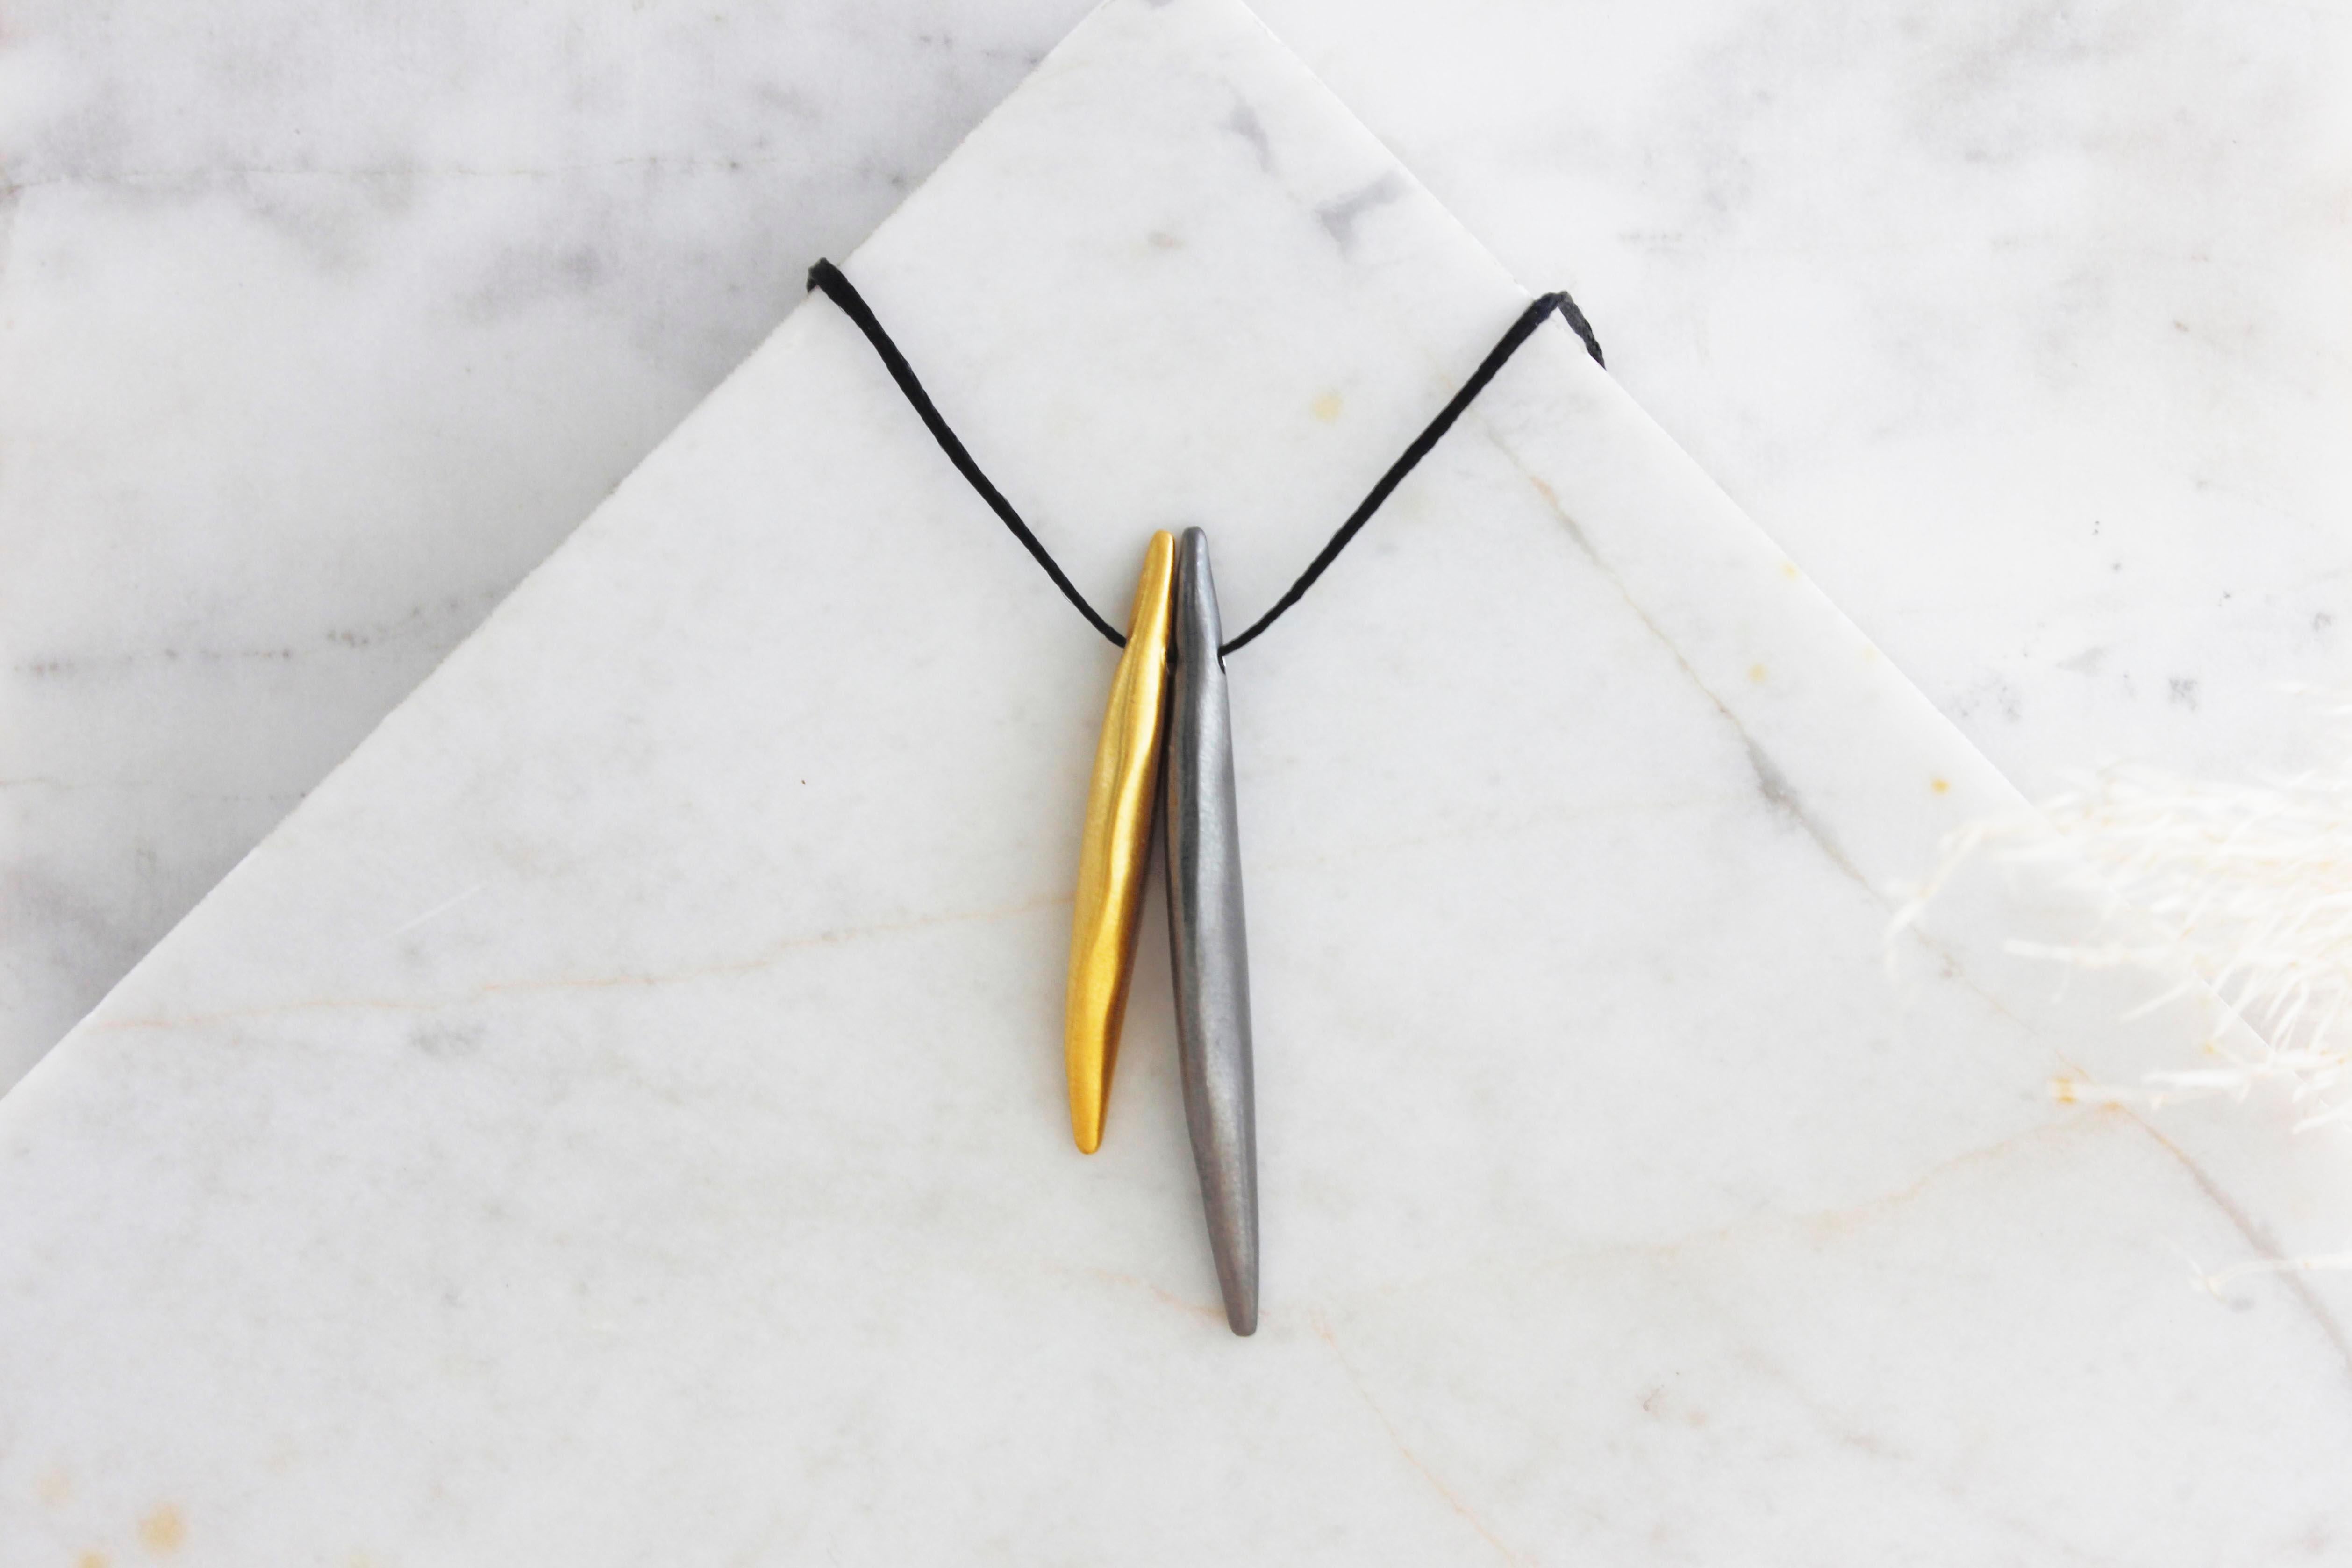 This is an elegant everyday “wings” necklace which consists of two handmade fine silver “wing”. Each “wing” is hammered by hand from a flat sheet into a hollow form, with the edges coming together perfectly above the curve.

The black cord is